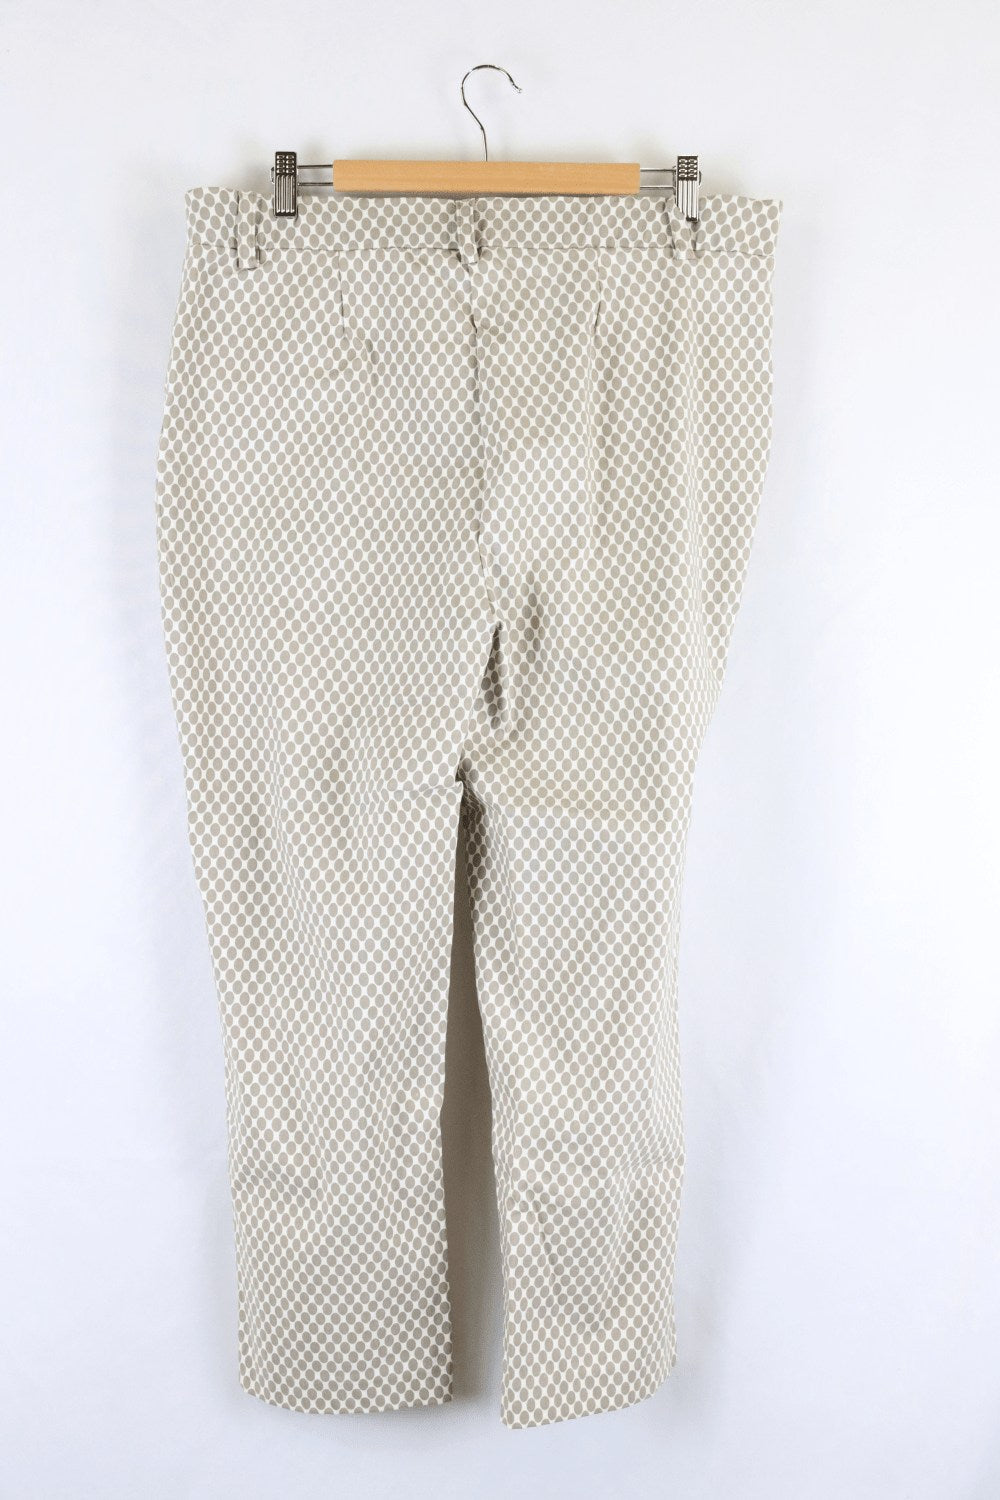 Noni B Brown Spotted Pants 14